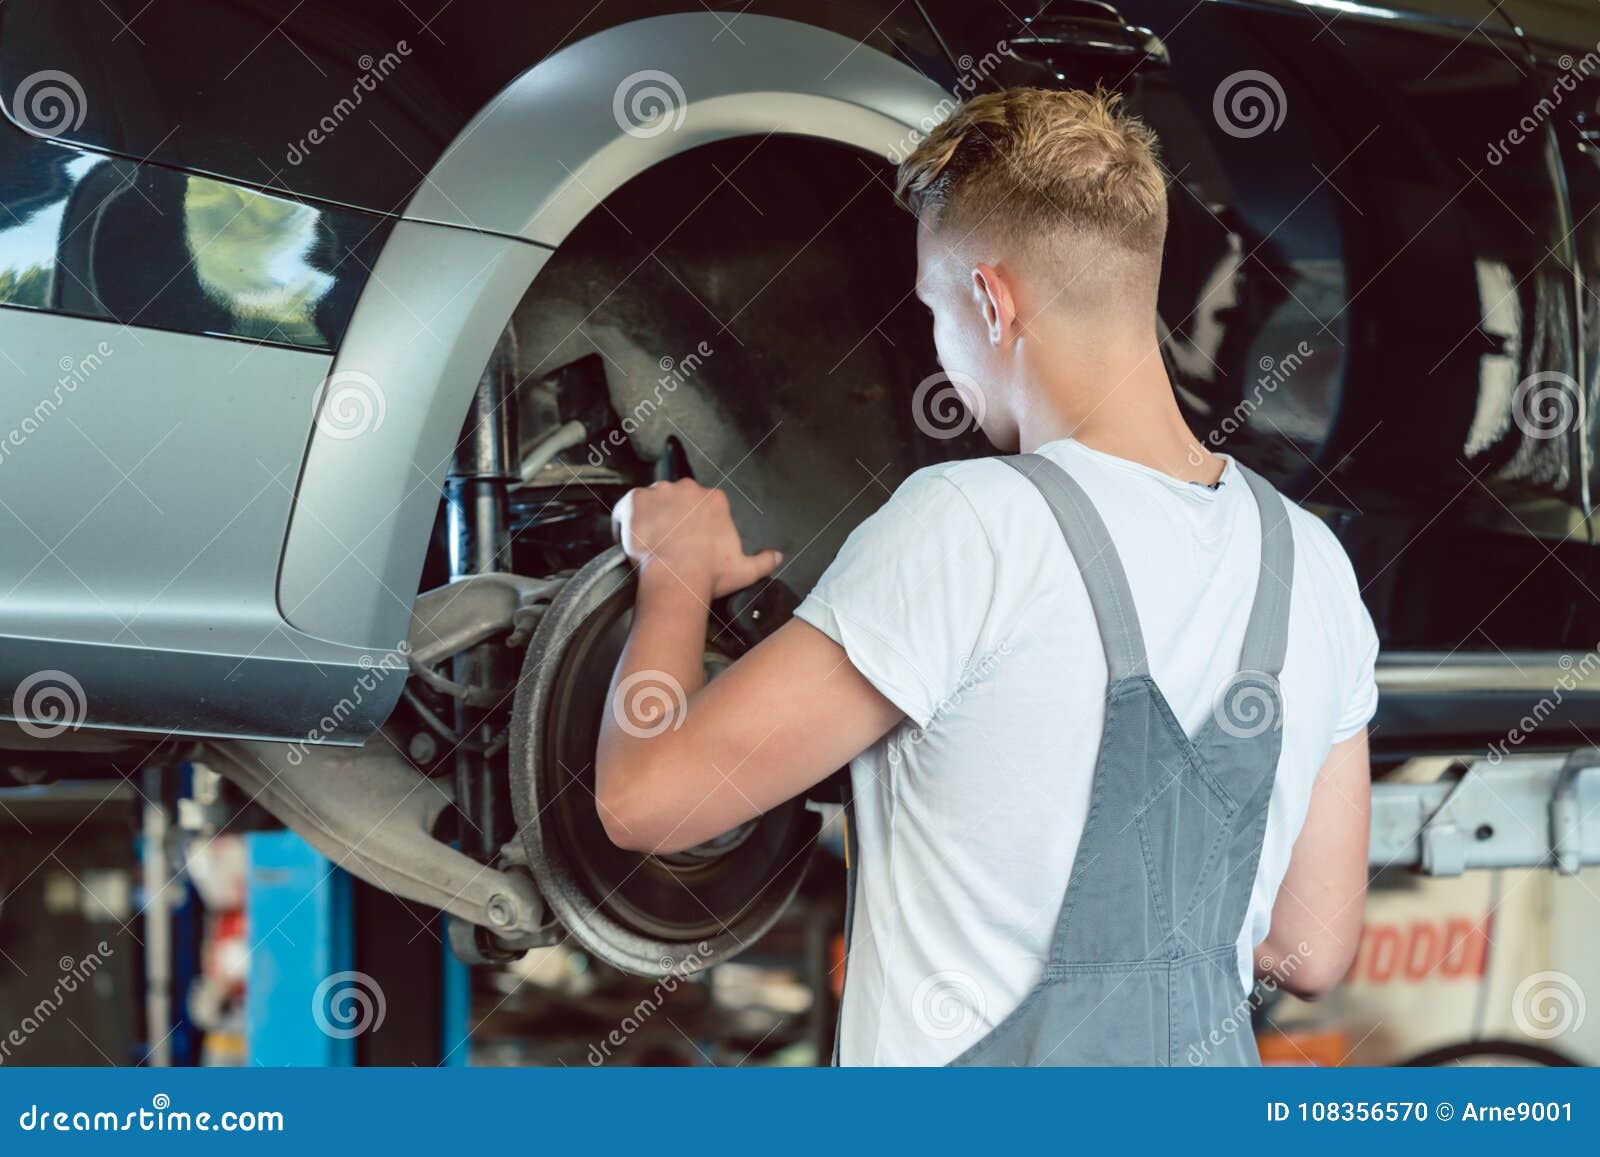 experienced mechanic replacing the disk brakes of a car in a mod